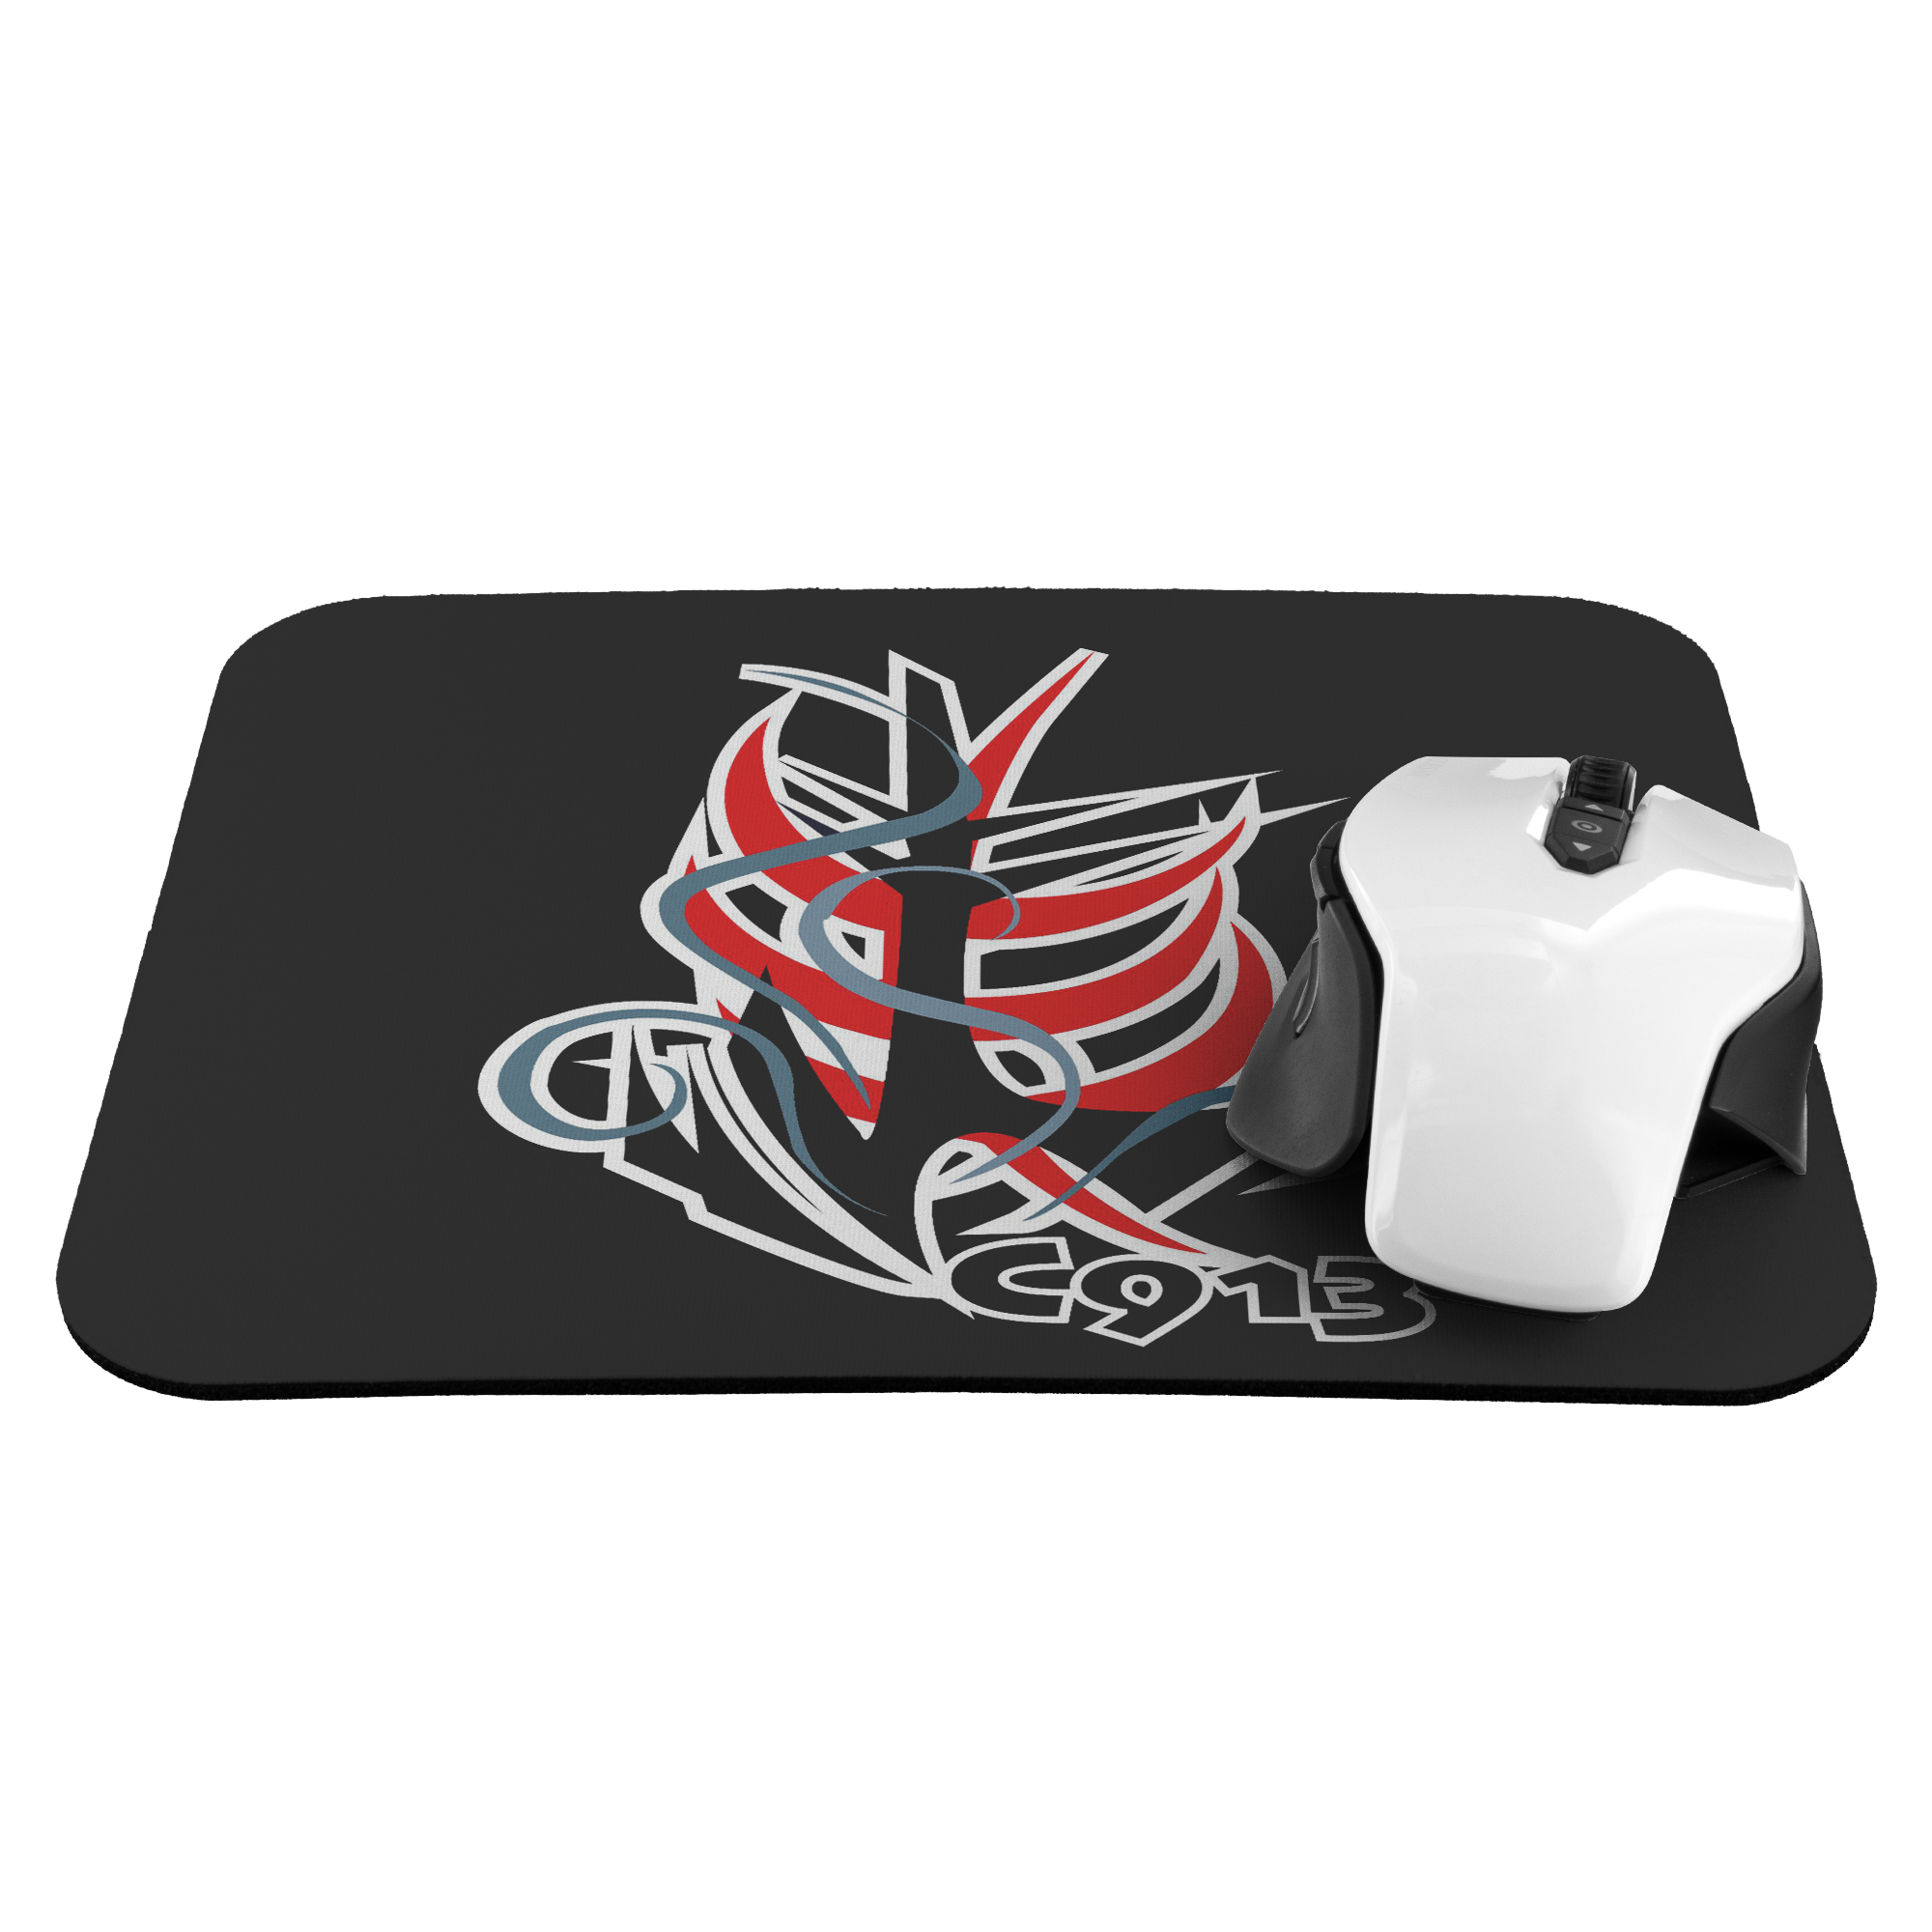 t-913 MOUSE PAD